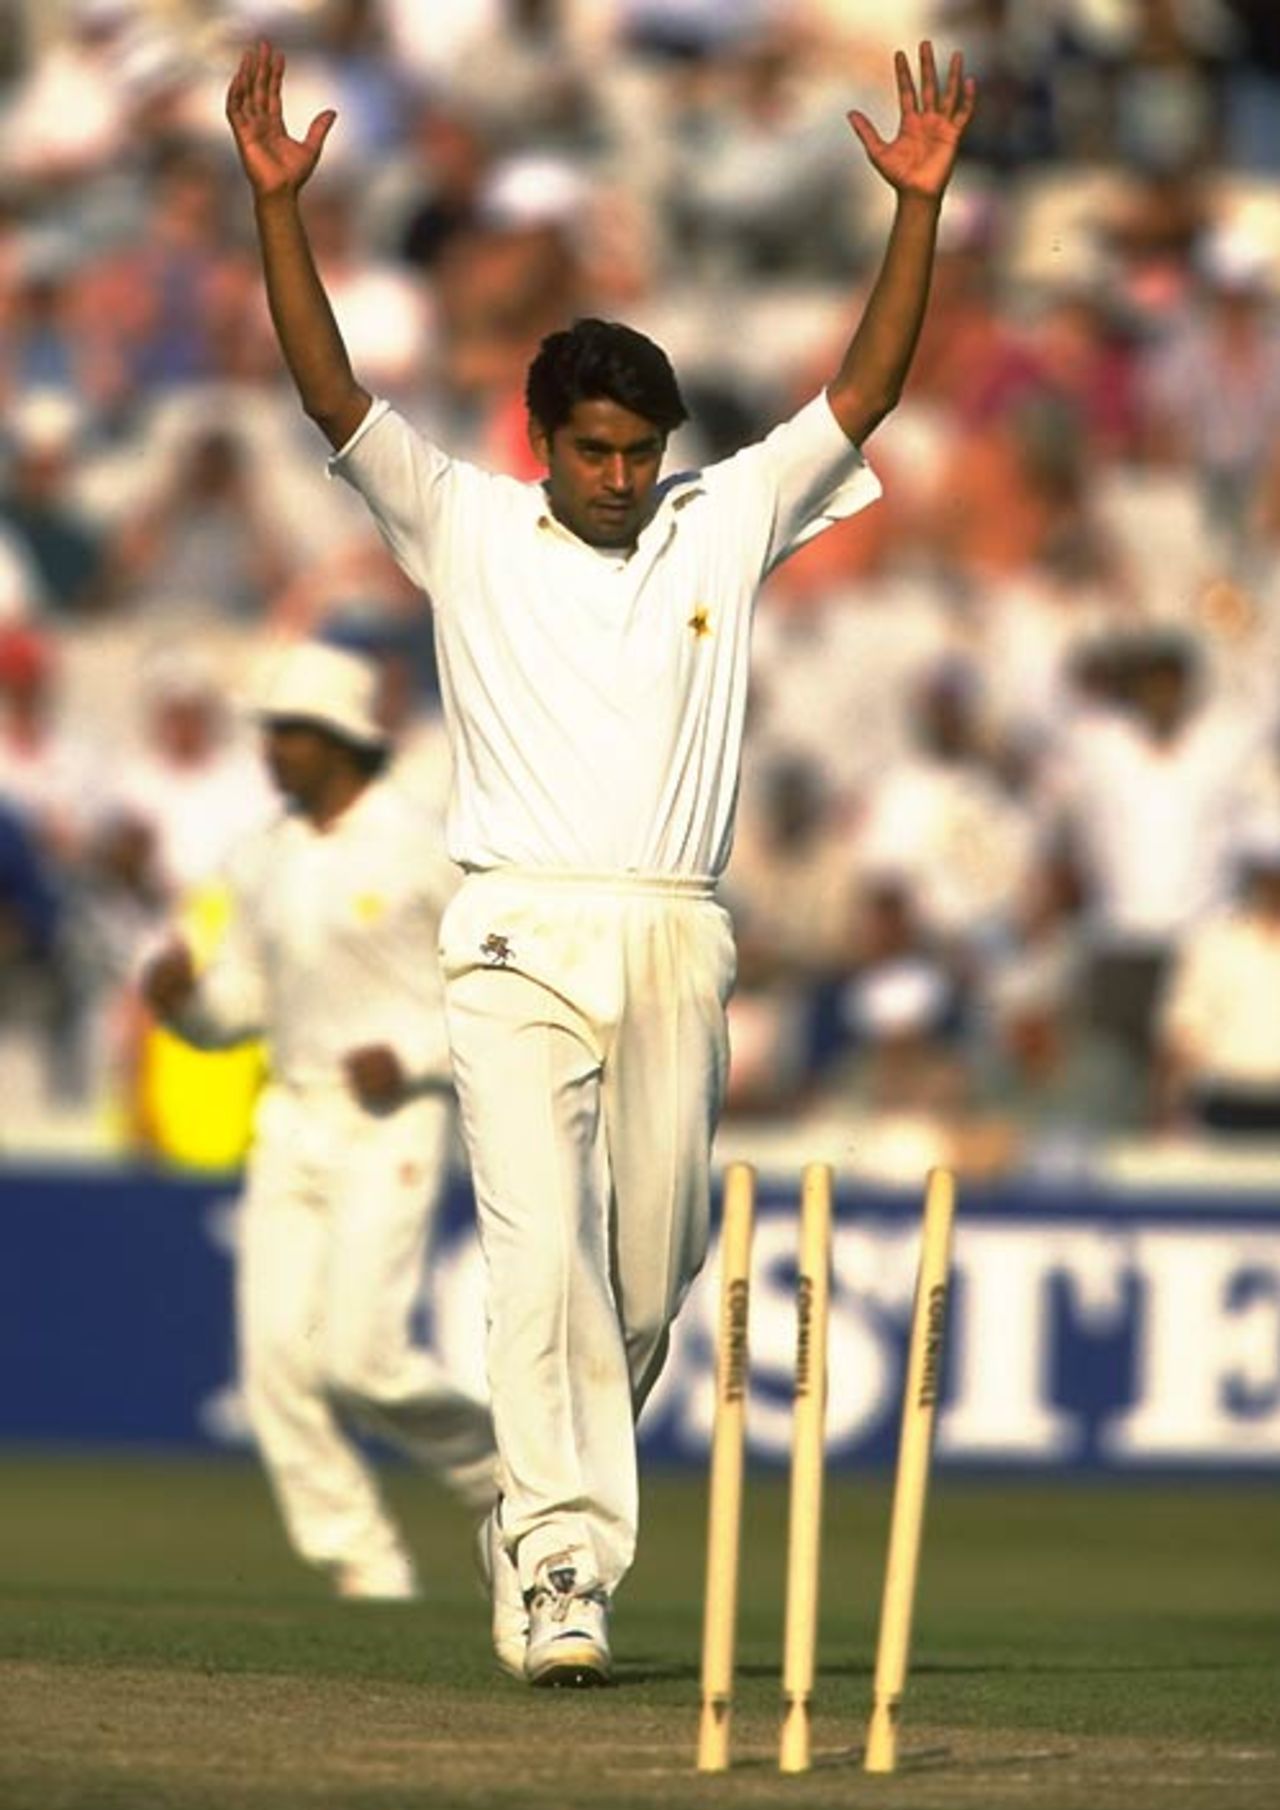 Aaqib Javed celebrates a wicket, England v Pakistan, 3rd Test, Old Trafford, July 7, 1992